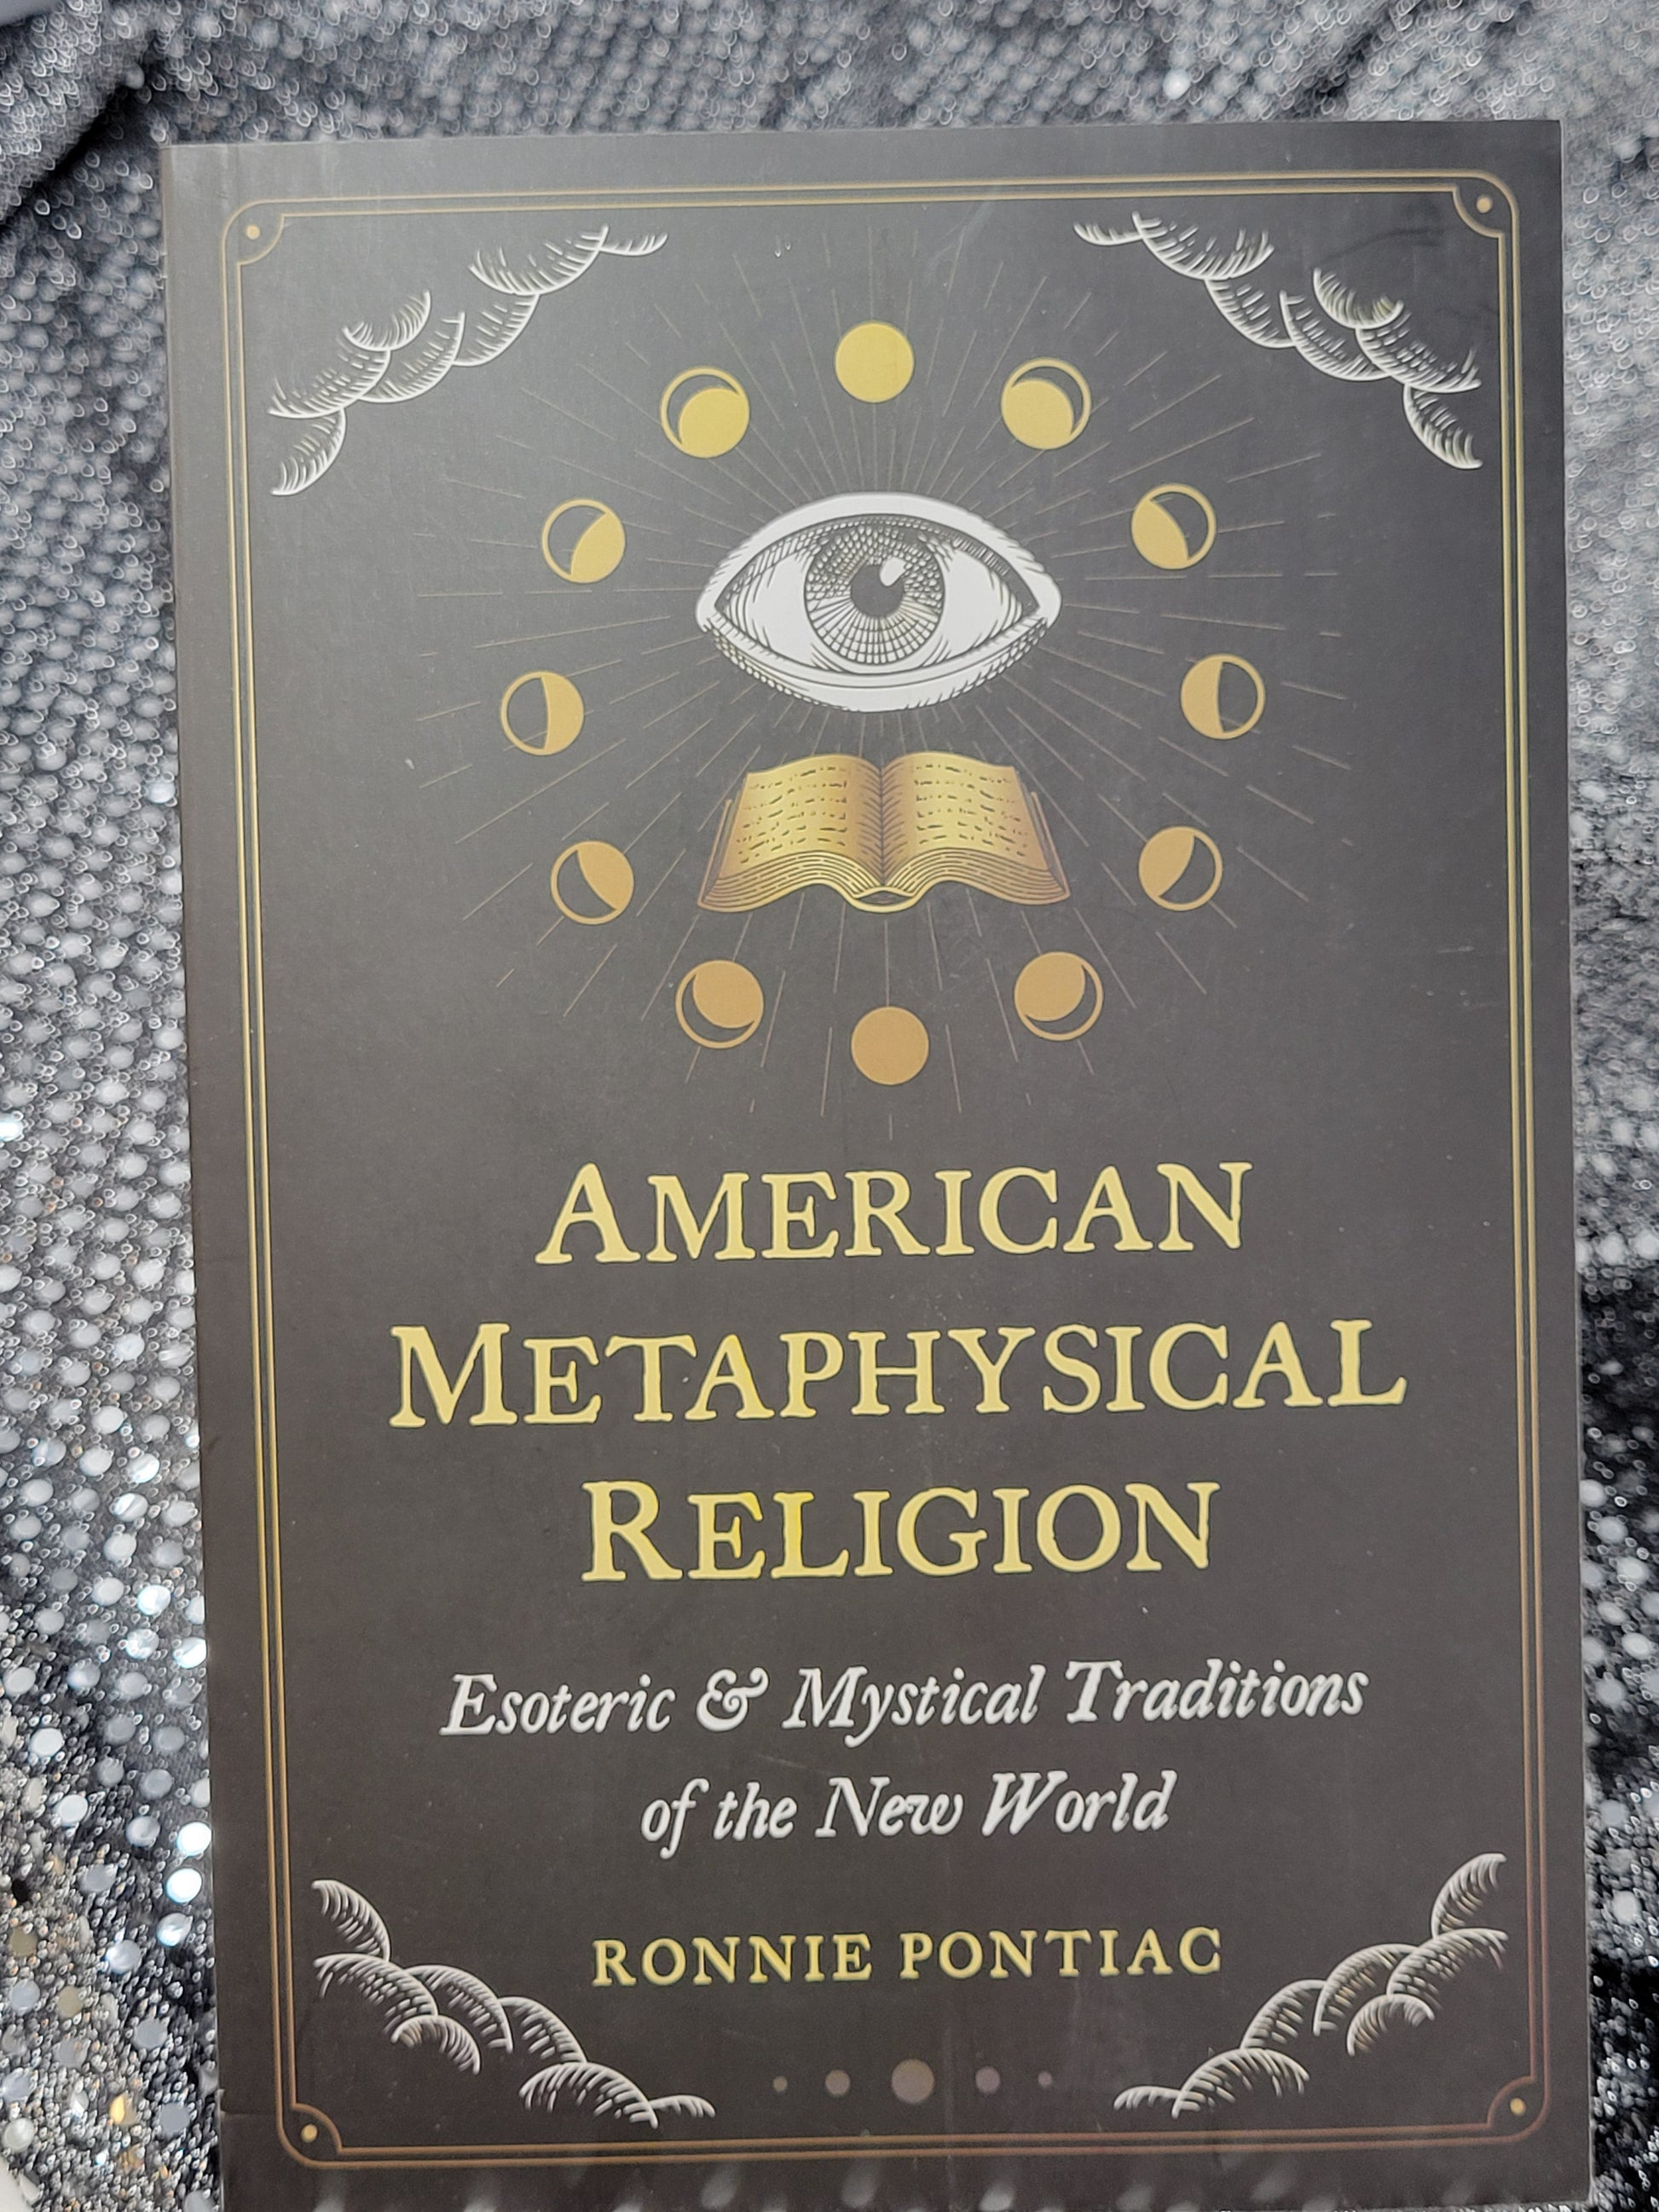 American Metaphysical Religion Esoteric and Mystical Traditions of the New World - By Ronnie Pontiac